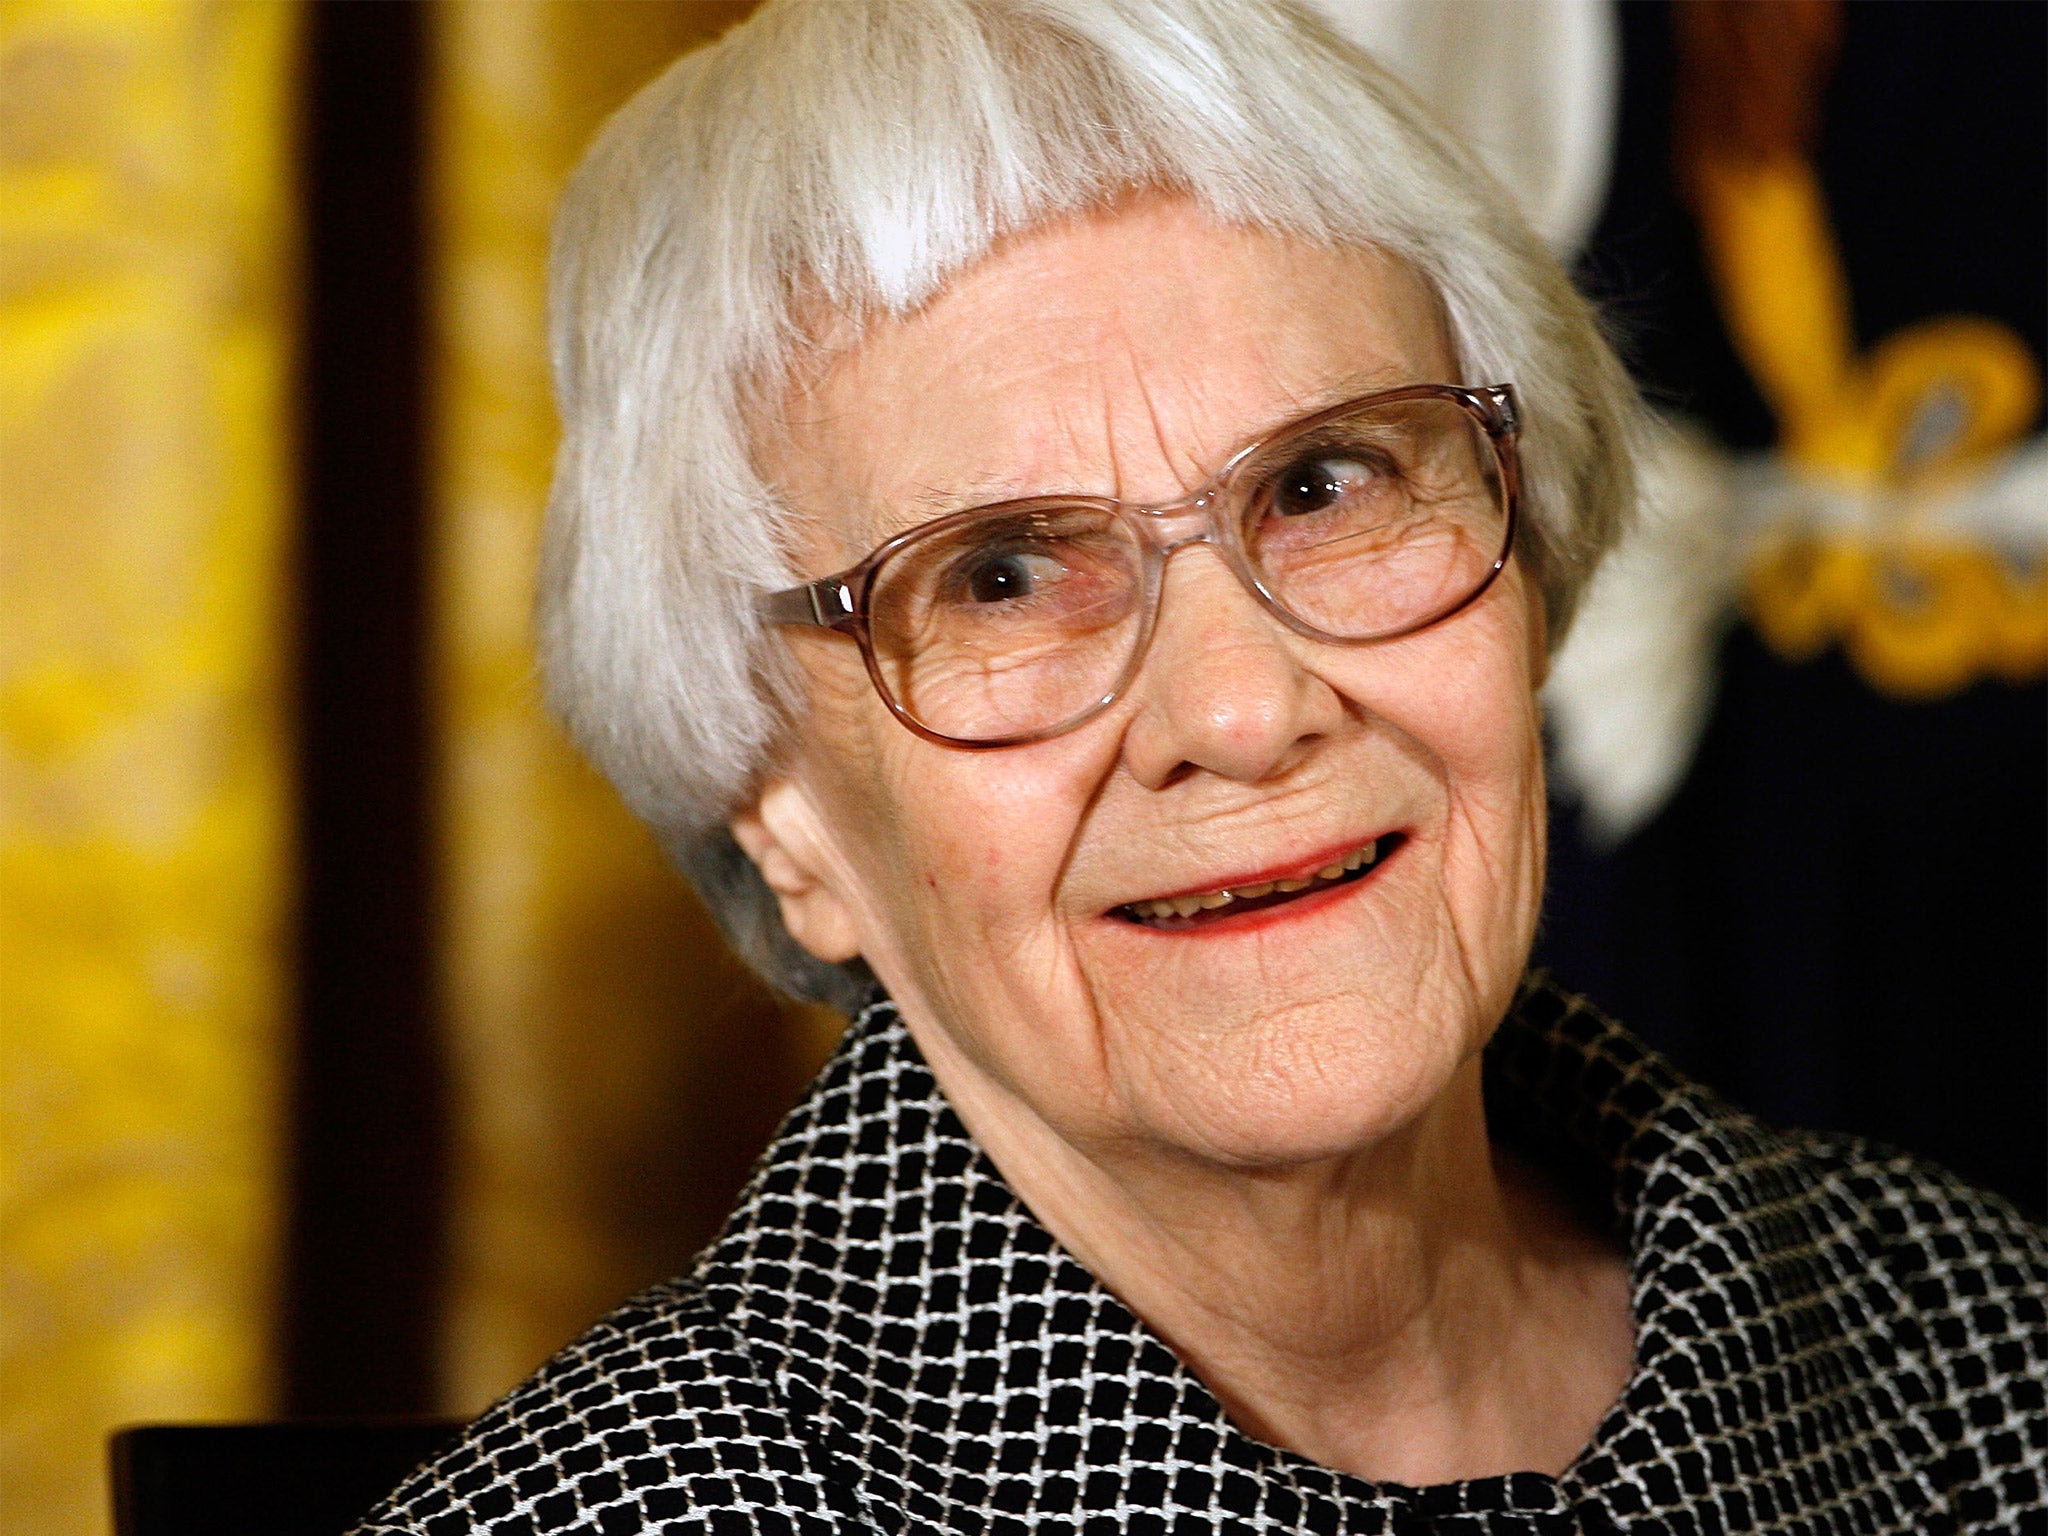 Harper Lee, 88, has shunned the spotlight since her classic novel was published in 1960